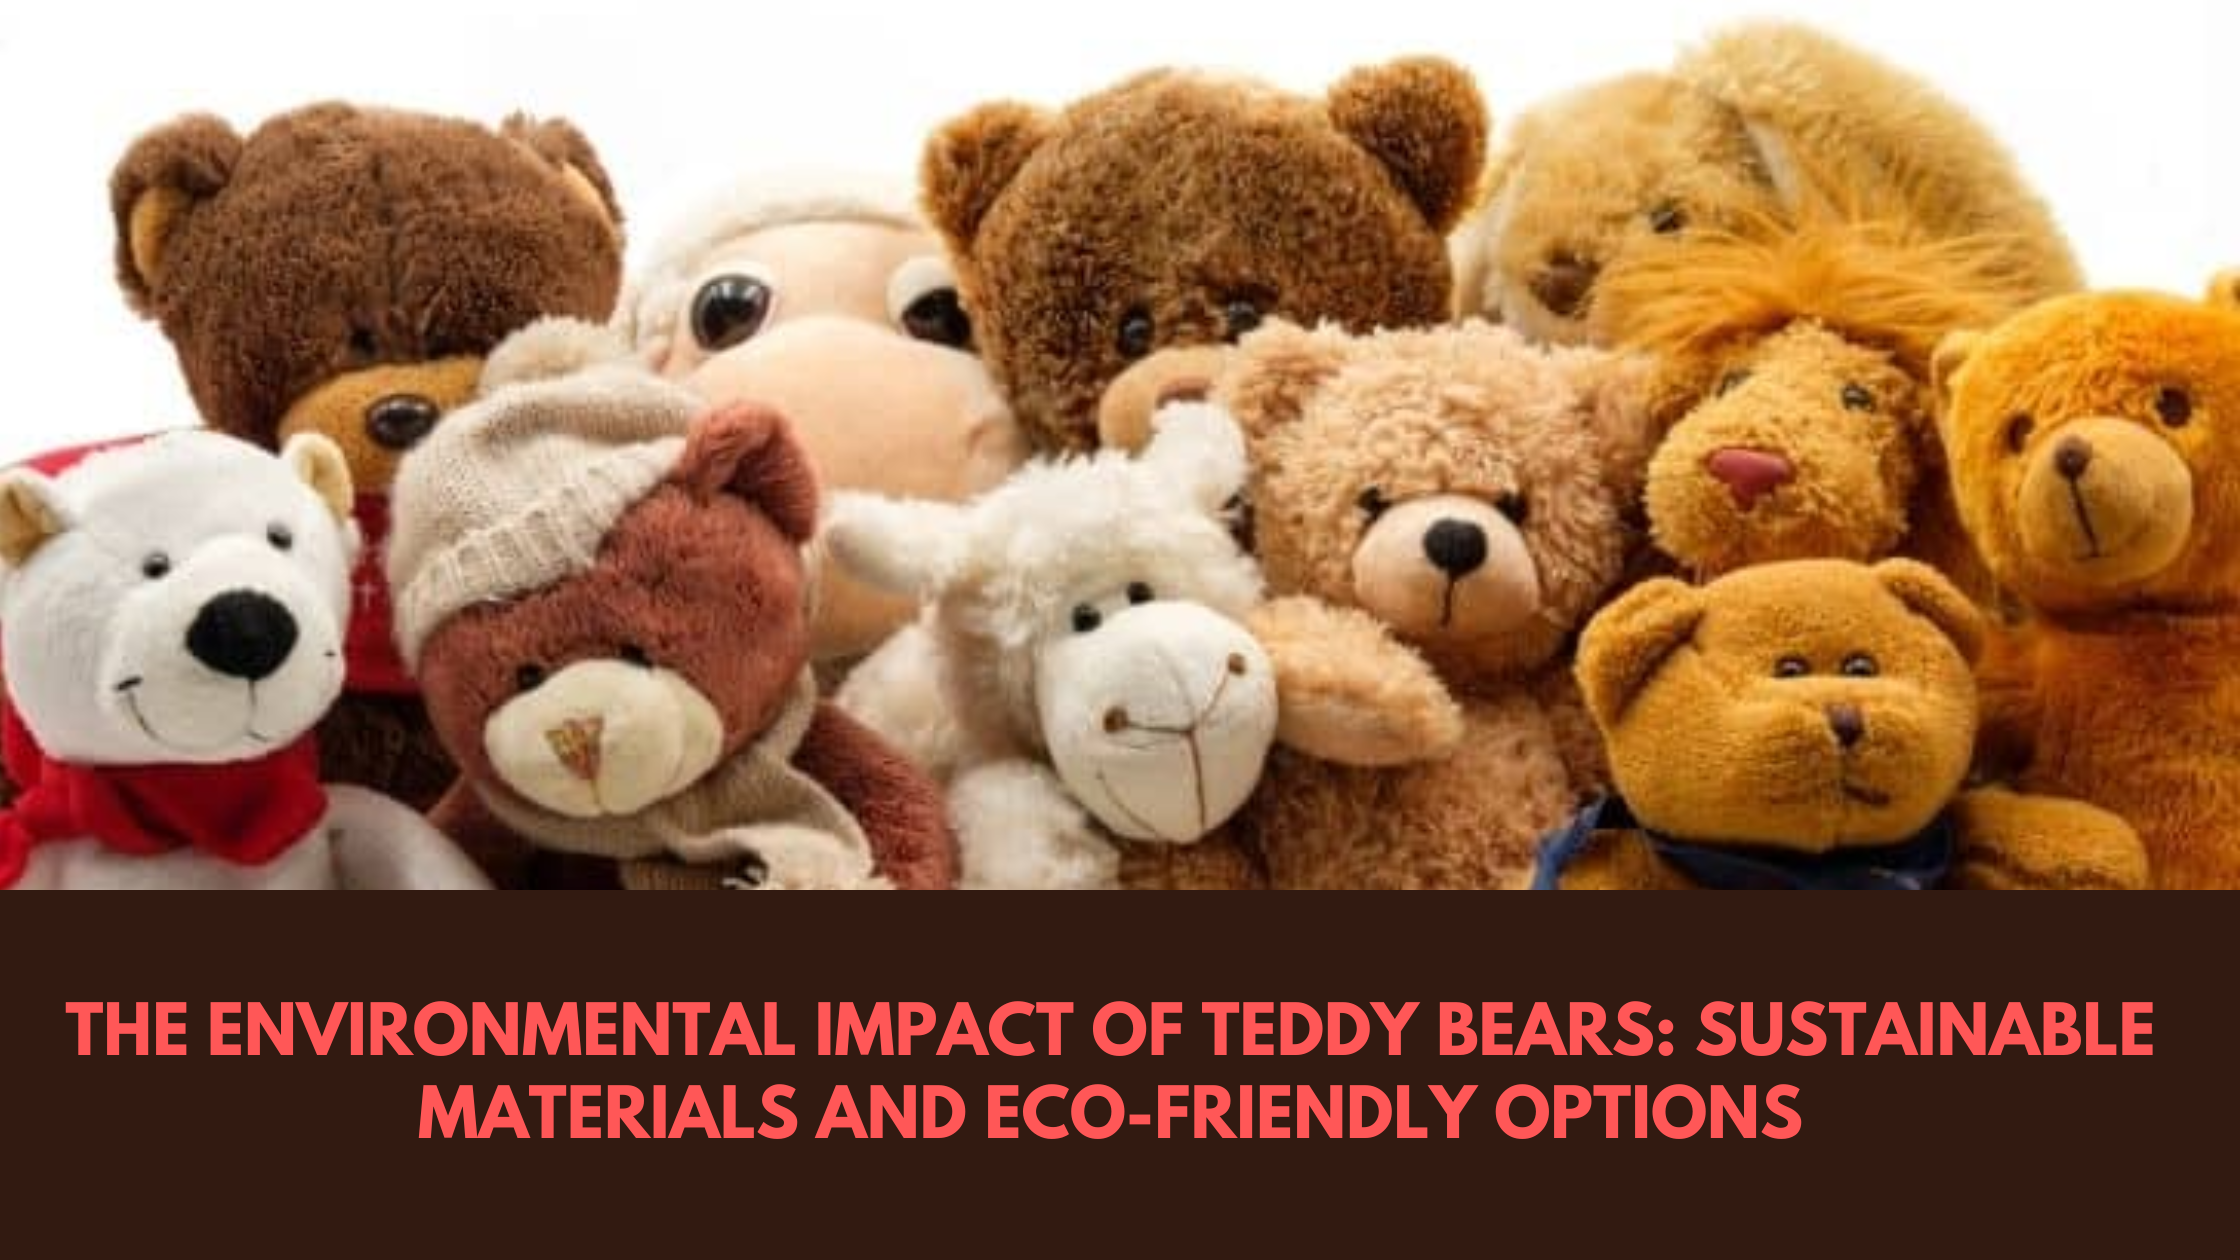 The Environmental Impact of Teddy Bears: Sustainable Materials and Eco-Friendly Options